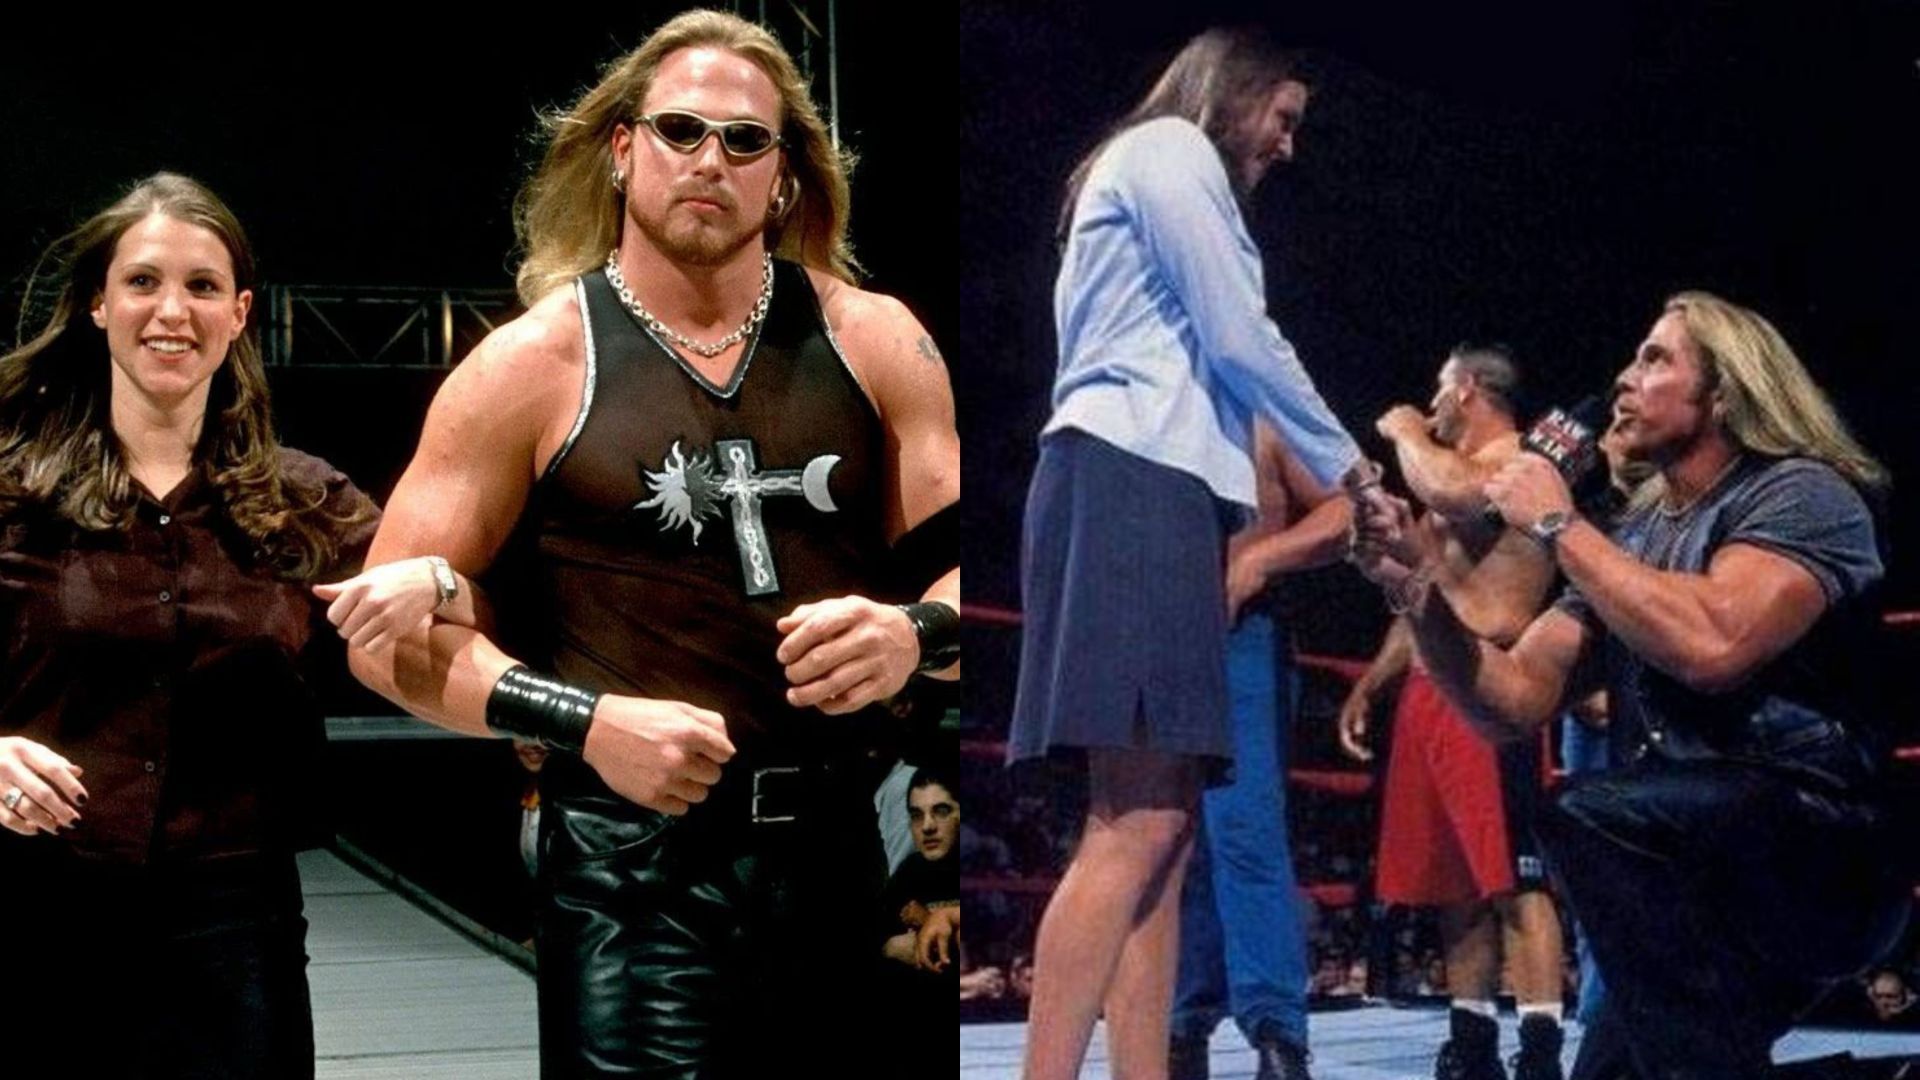 Test and Stephanie McMahon had an on-screen relationship in WWE